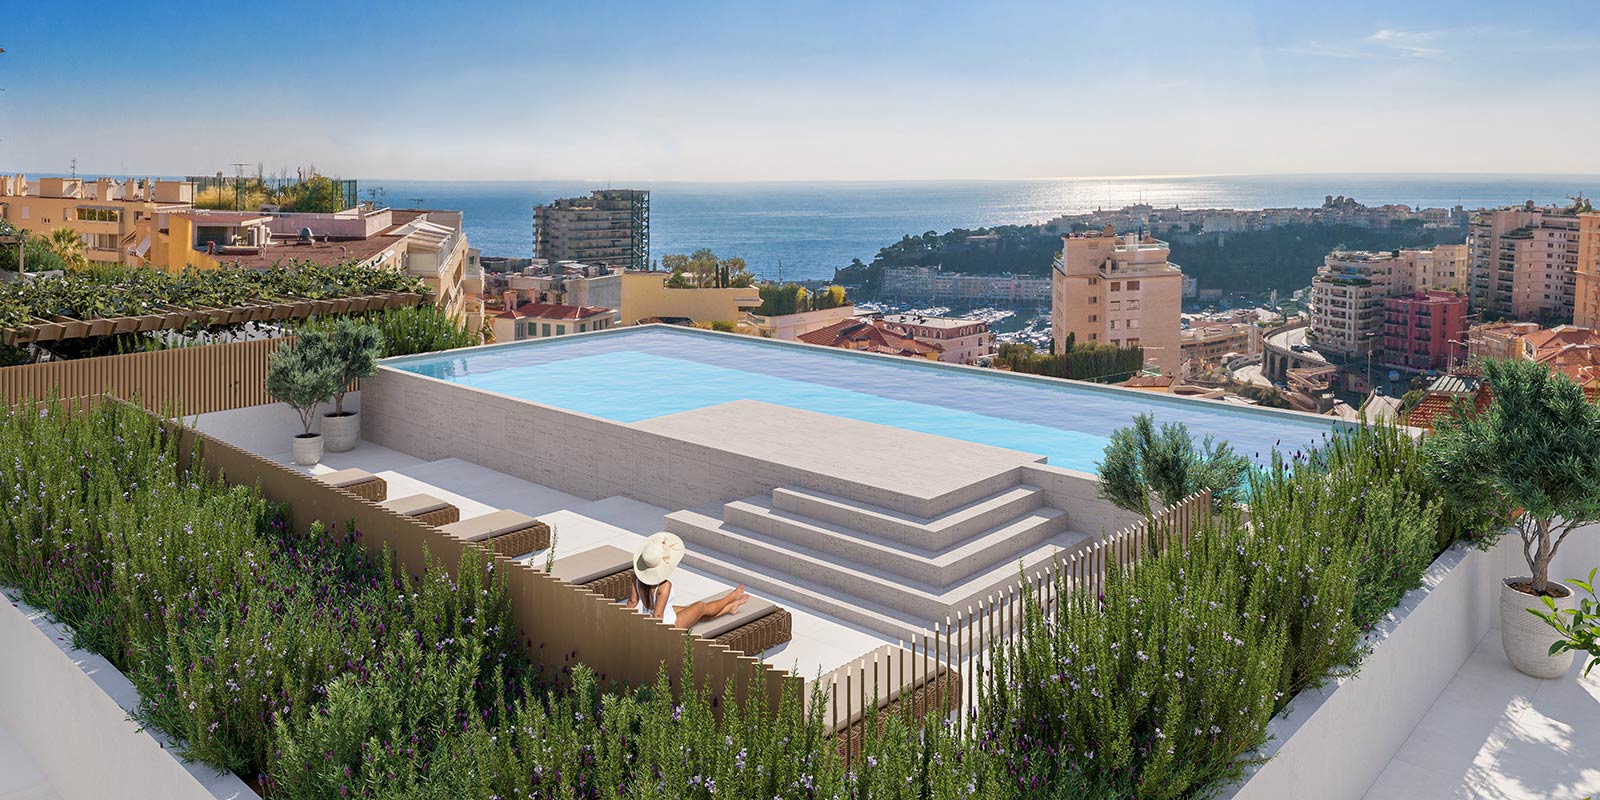 Here is the swimming pool on the roof of the 29 Beausoleil real estate program in Monaco.